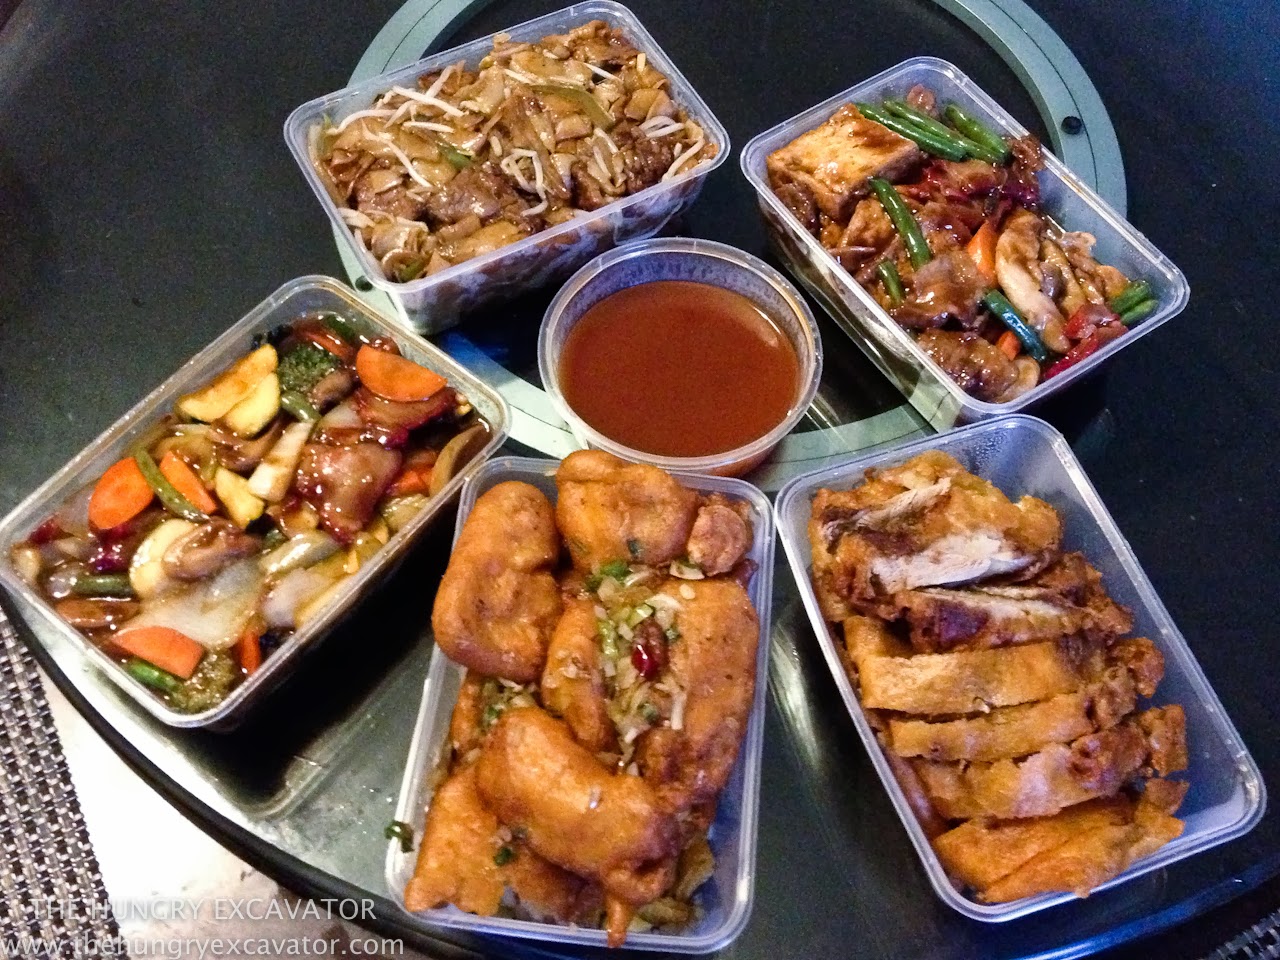 Chinese Food That Delivers To Me Byba Delivery Chinese Food Near Me 11 reviews opens in 5